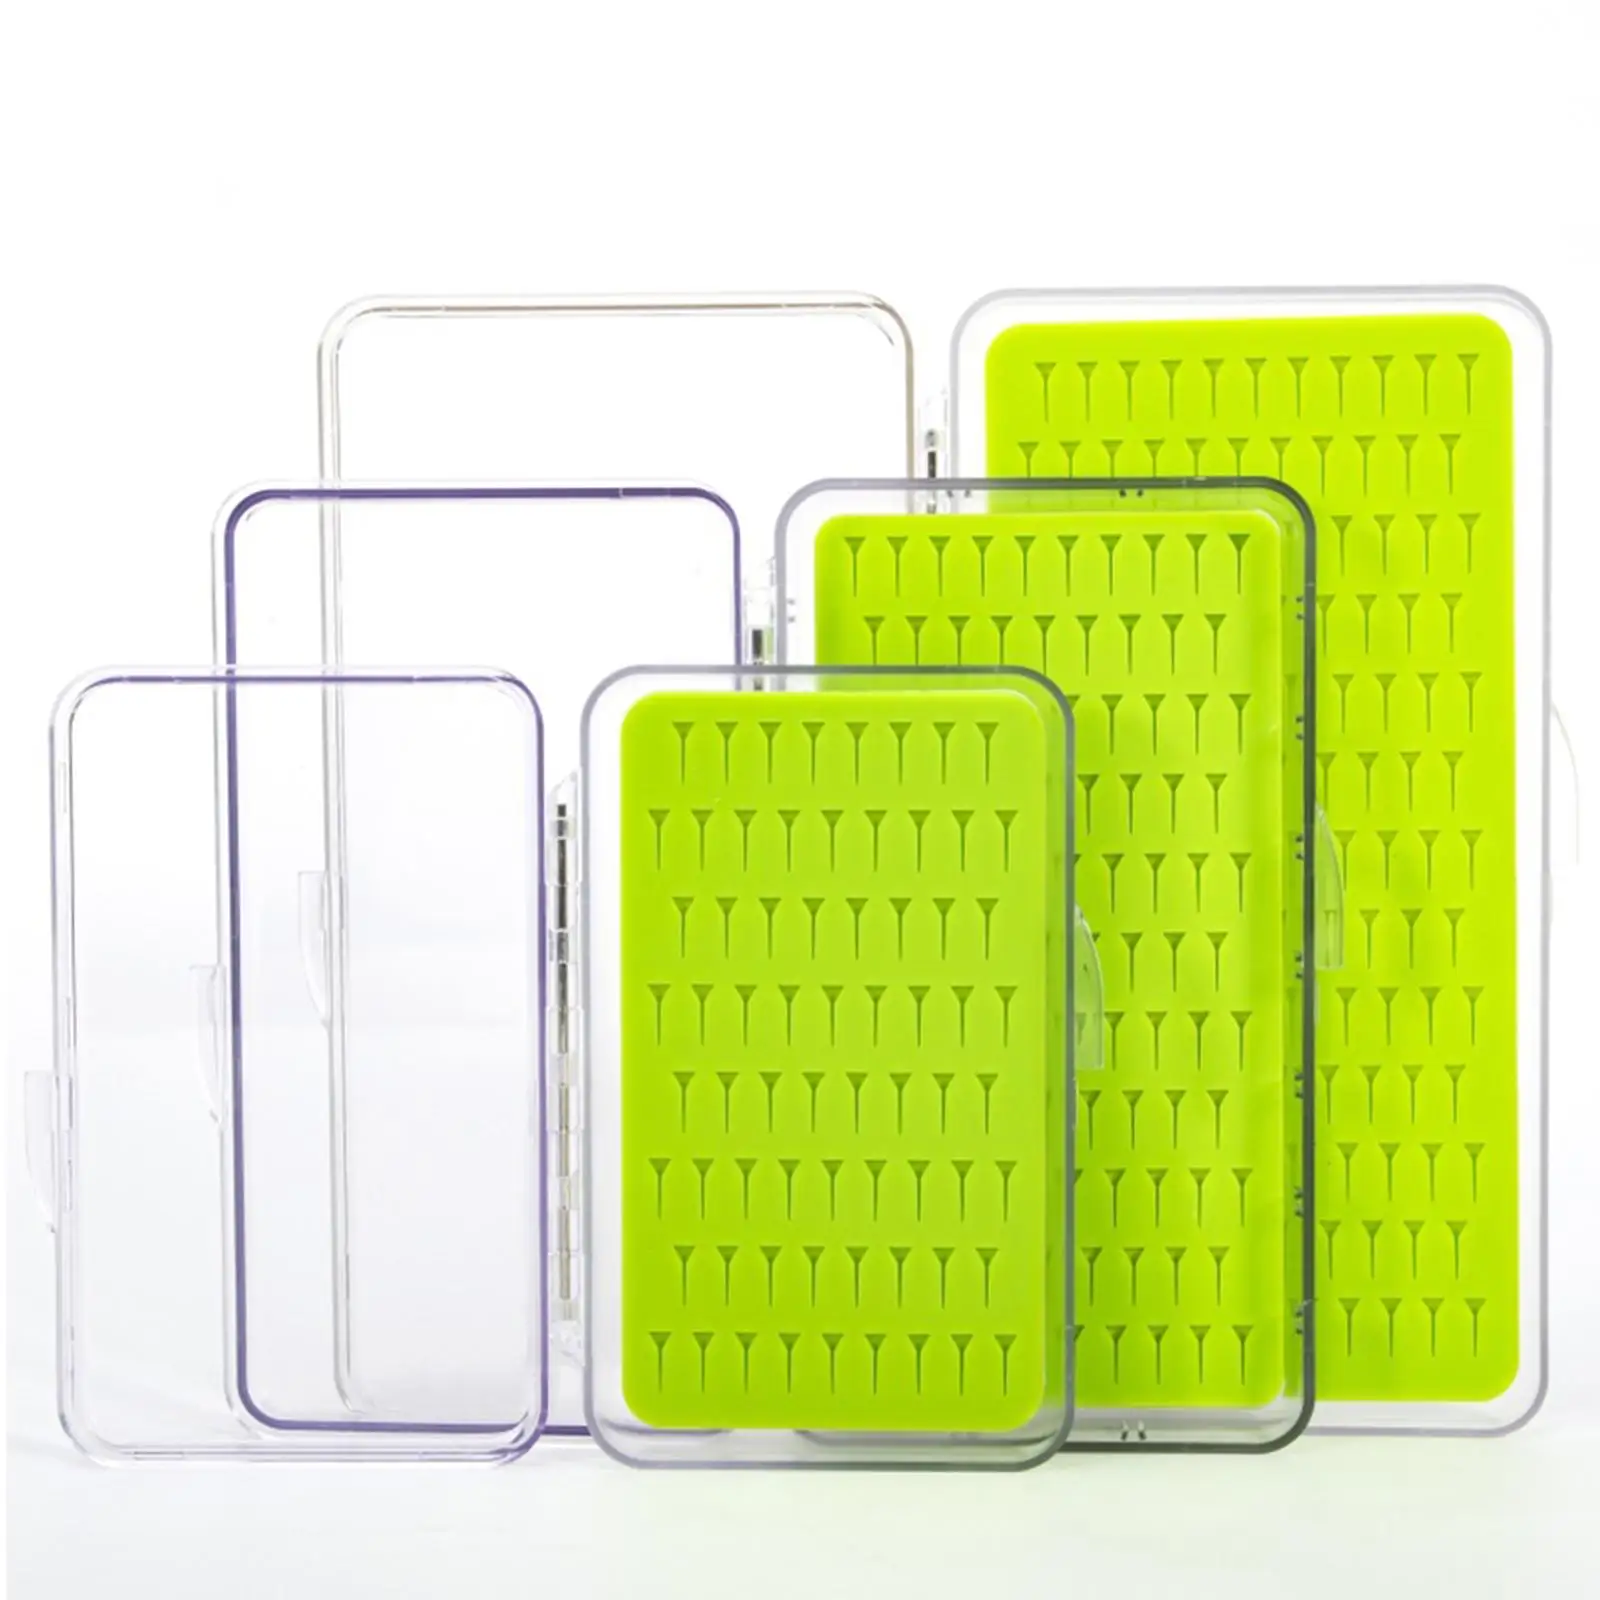 Waterproof Fly Fishing Box Clear Lid Silicone Fishing Tackle Bait Box Fishing Streamer Case Organizer